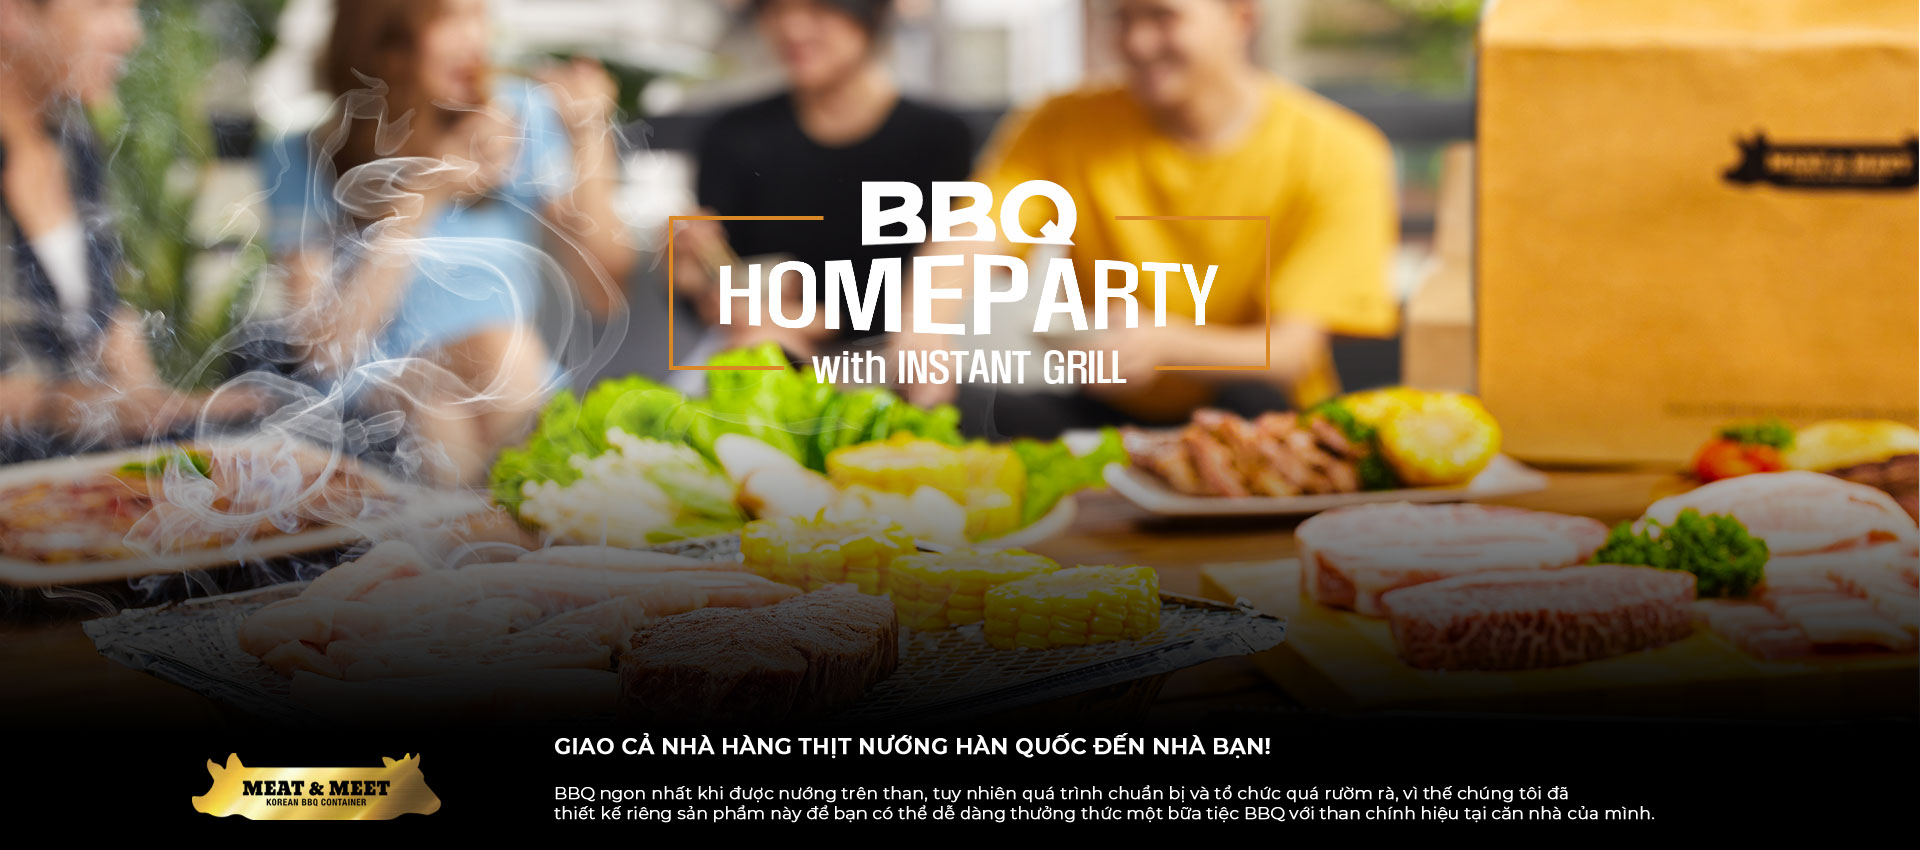 Banner Bbq Home Party Meat And Meet 1920850 Vn